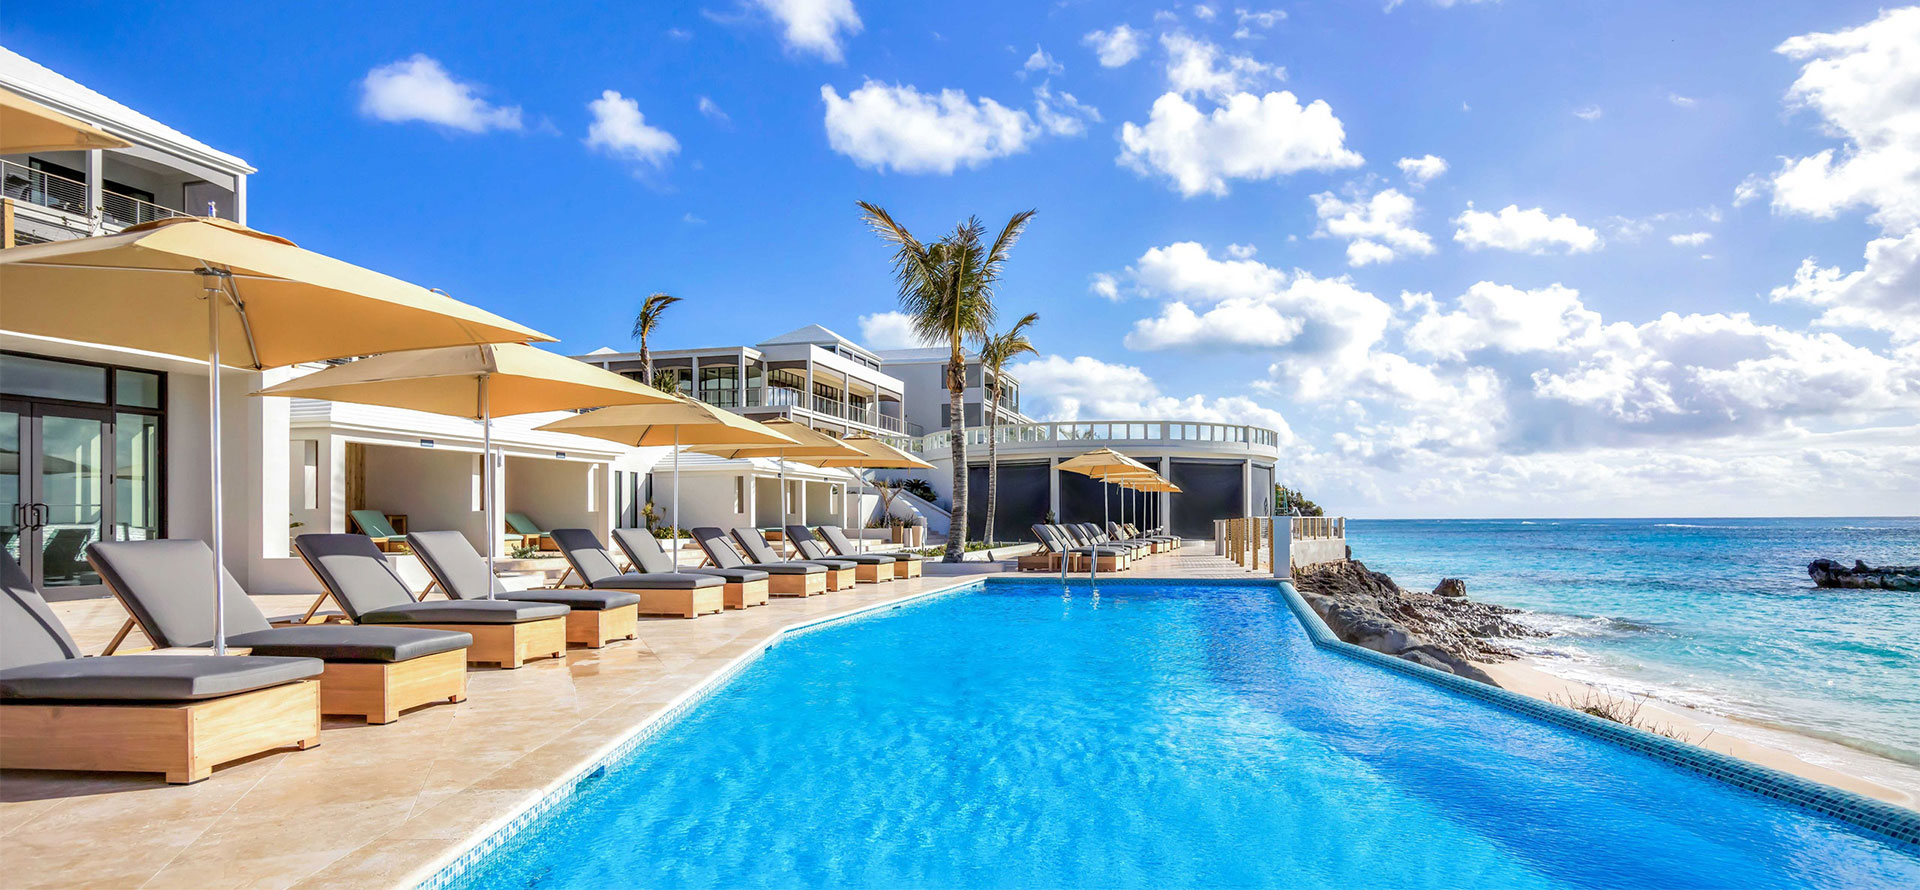 Bermuda all inclusive resorts with pool.